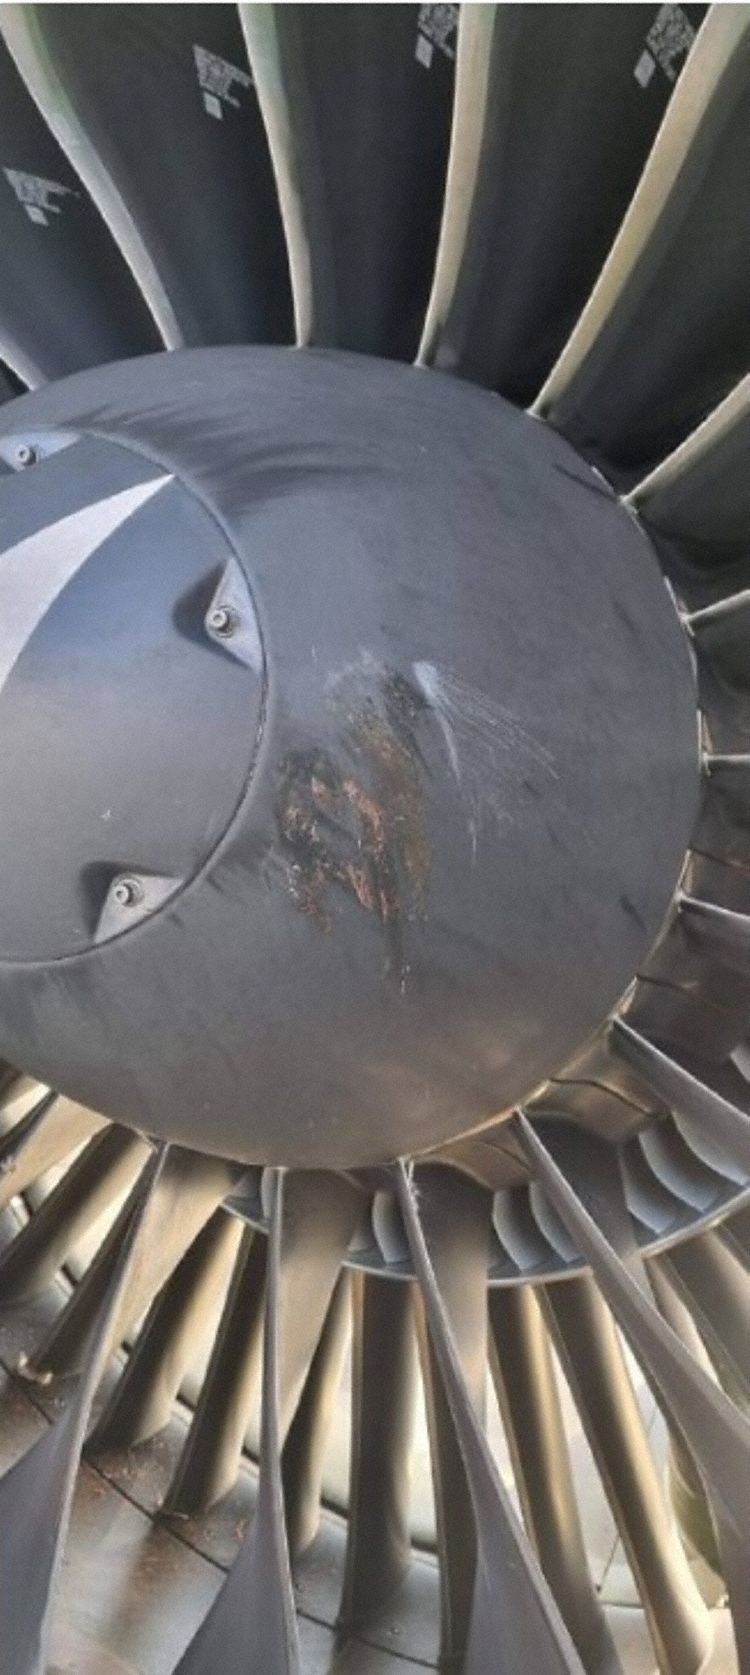 Incident Astana A21N at Istanbul and Almaty on Aug 23rd 2022, bird strike